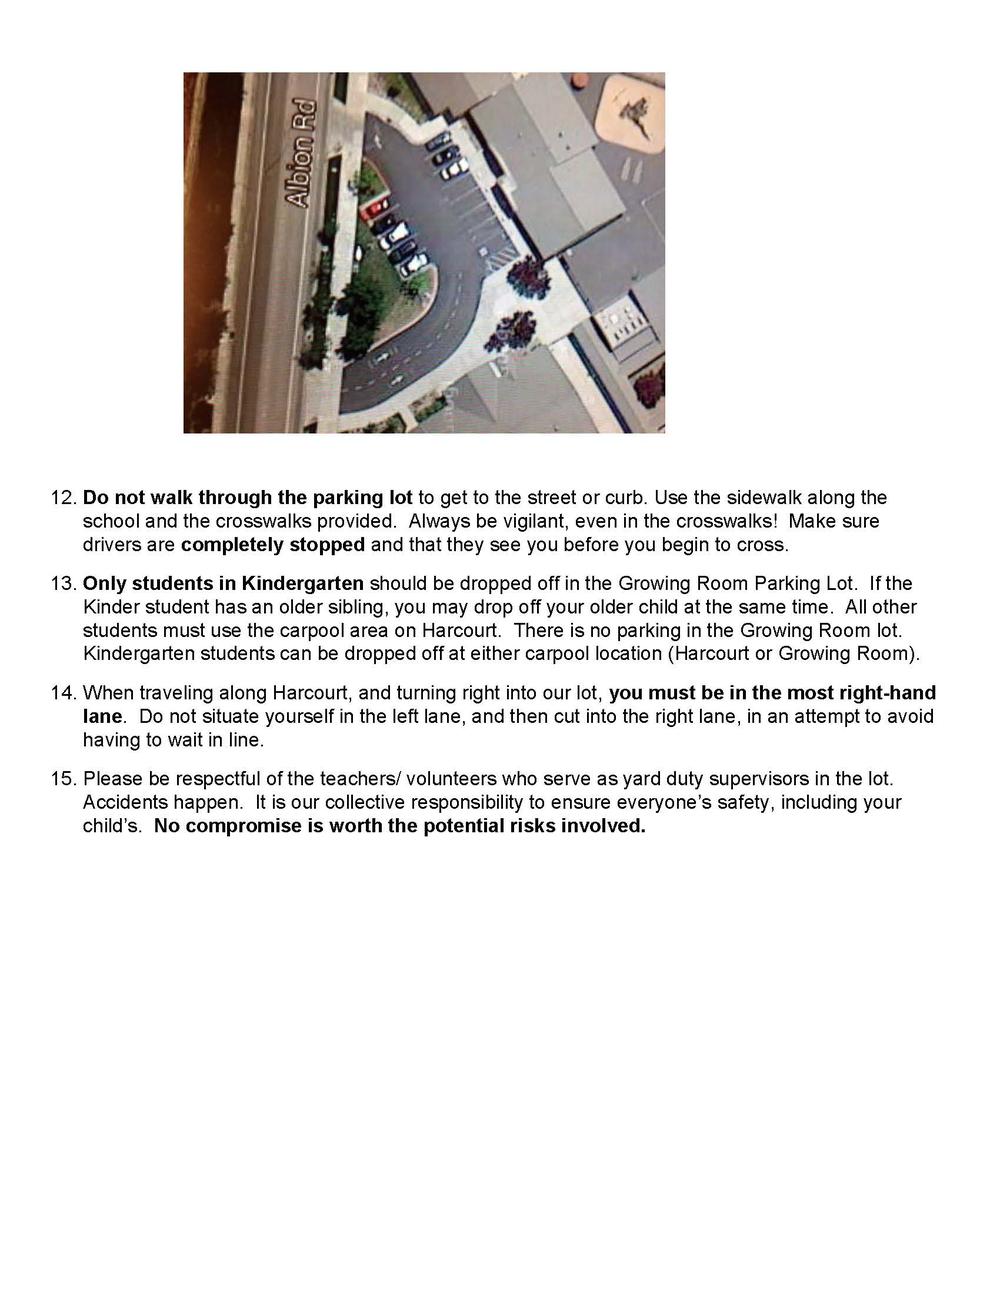 Parking Safety Guidelines with pictures Page 2